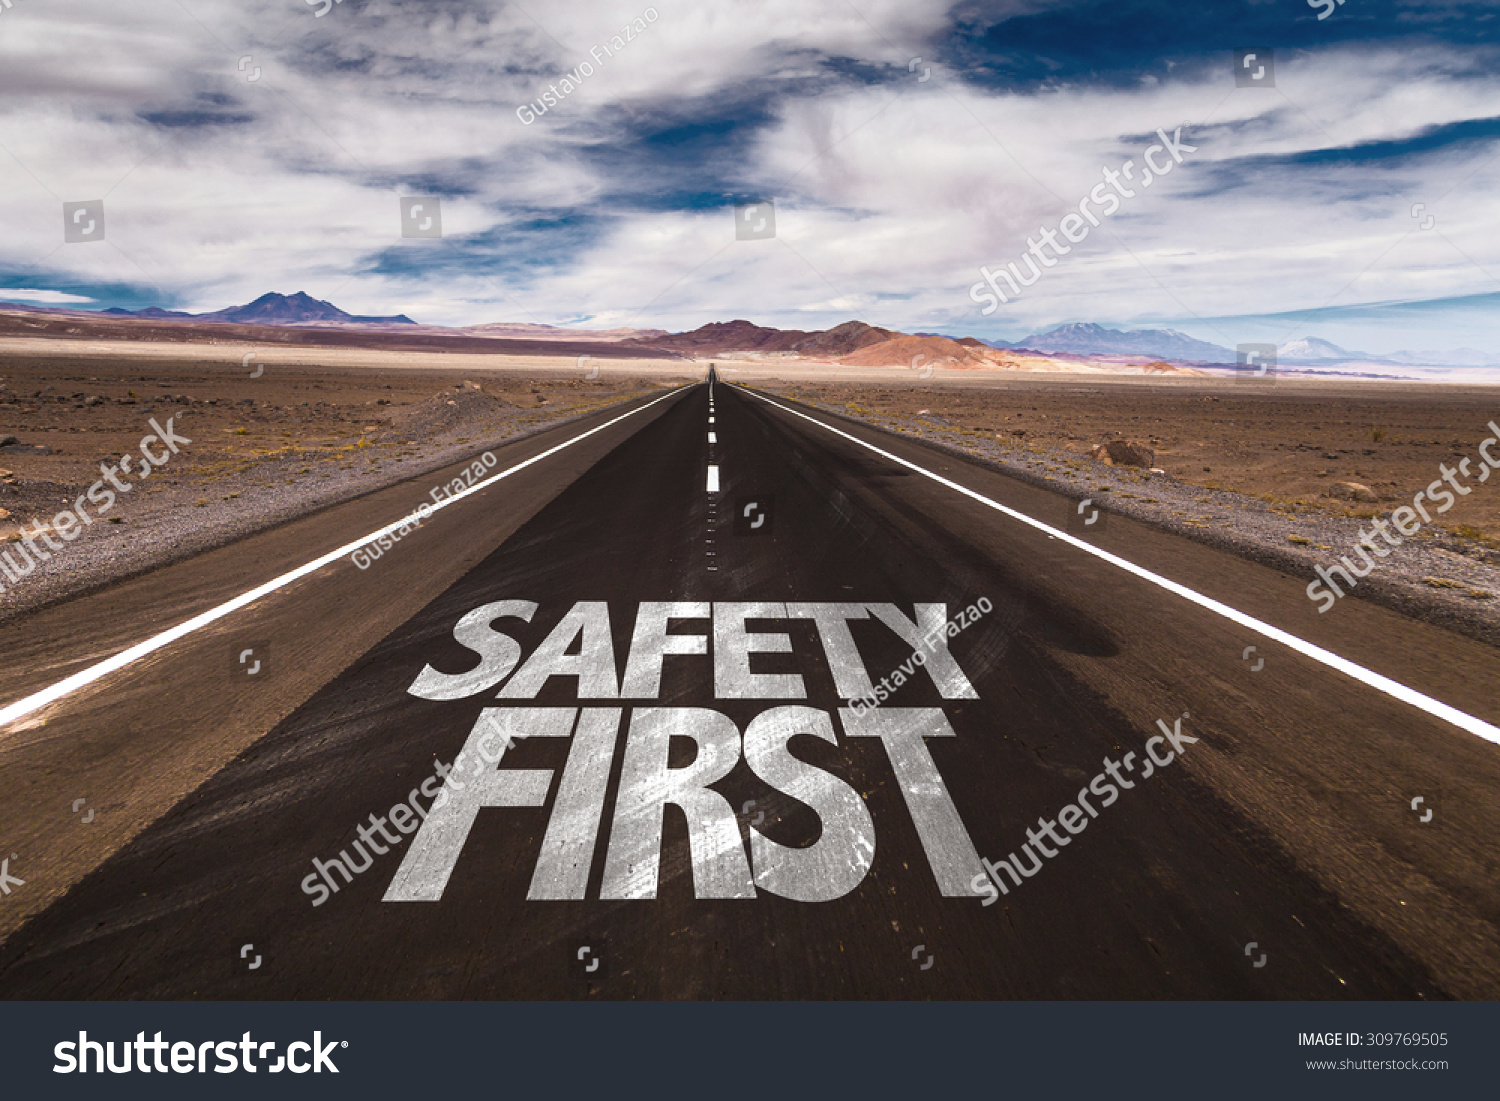 PowerPoint Template road safety first written on (khuonumhm)